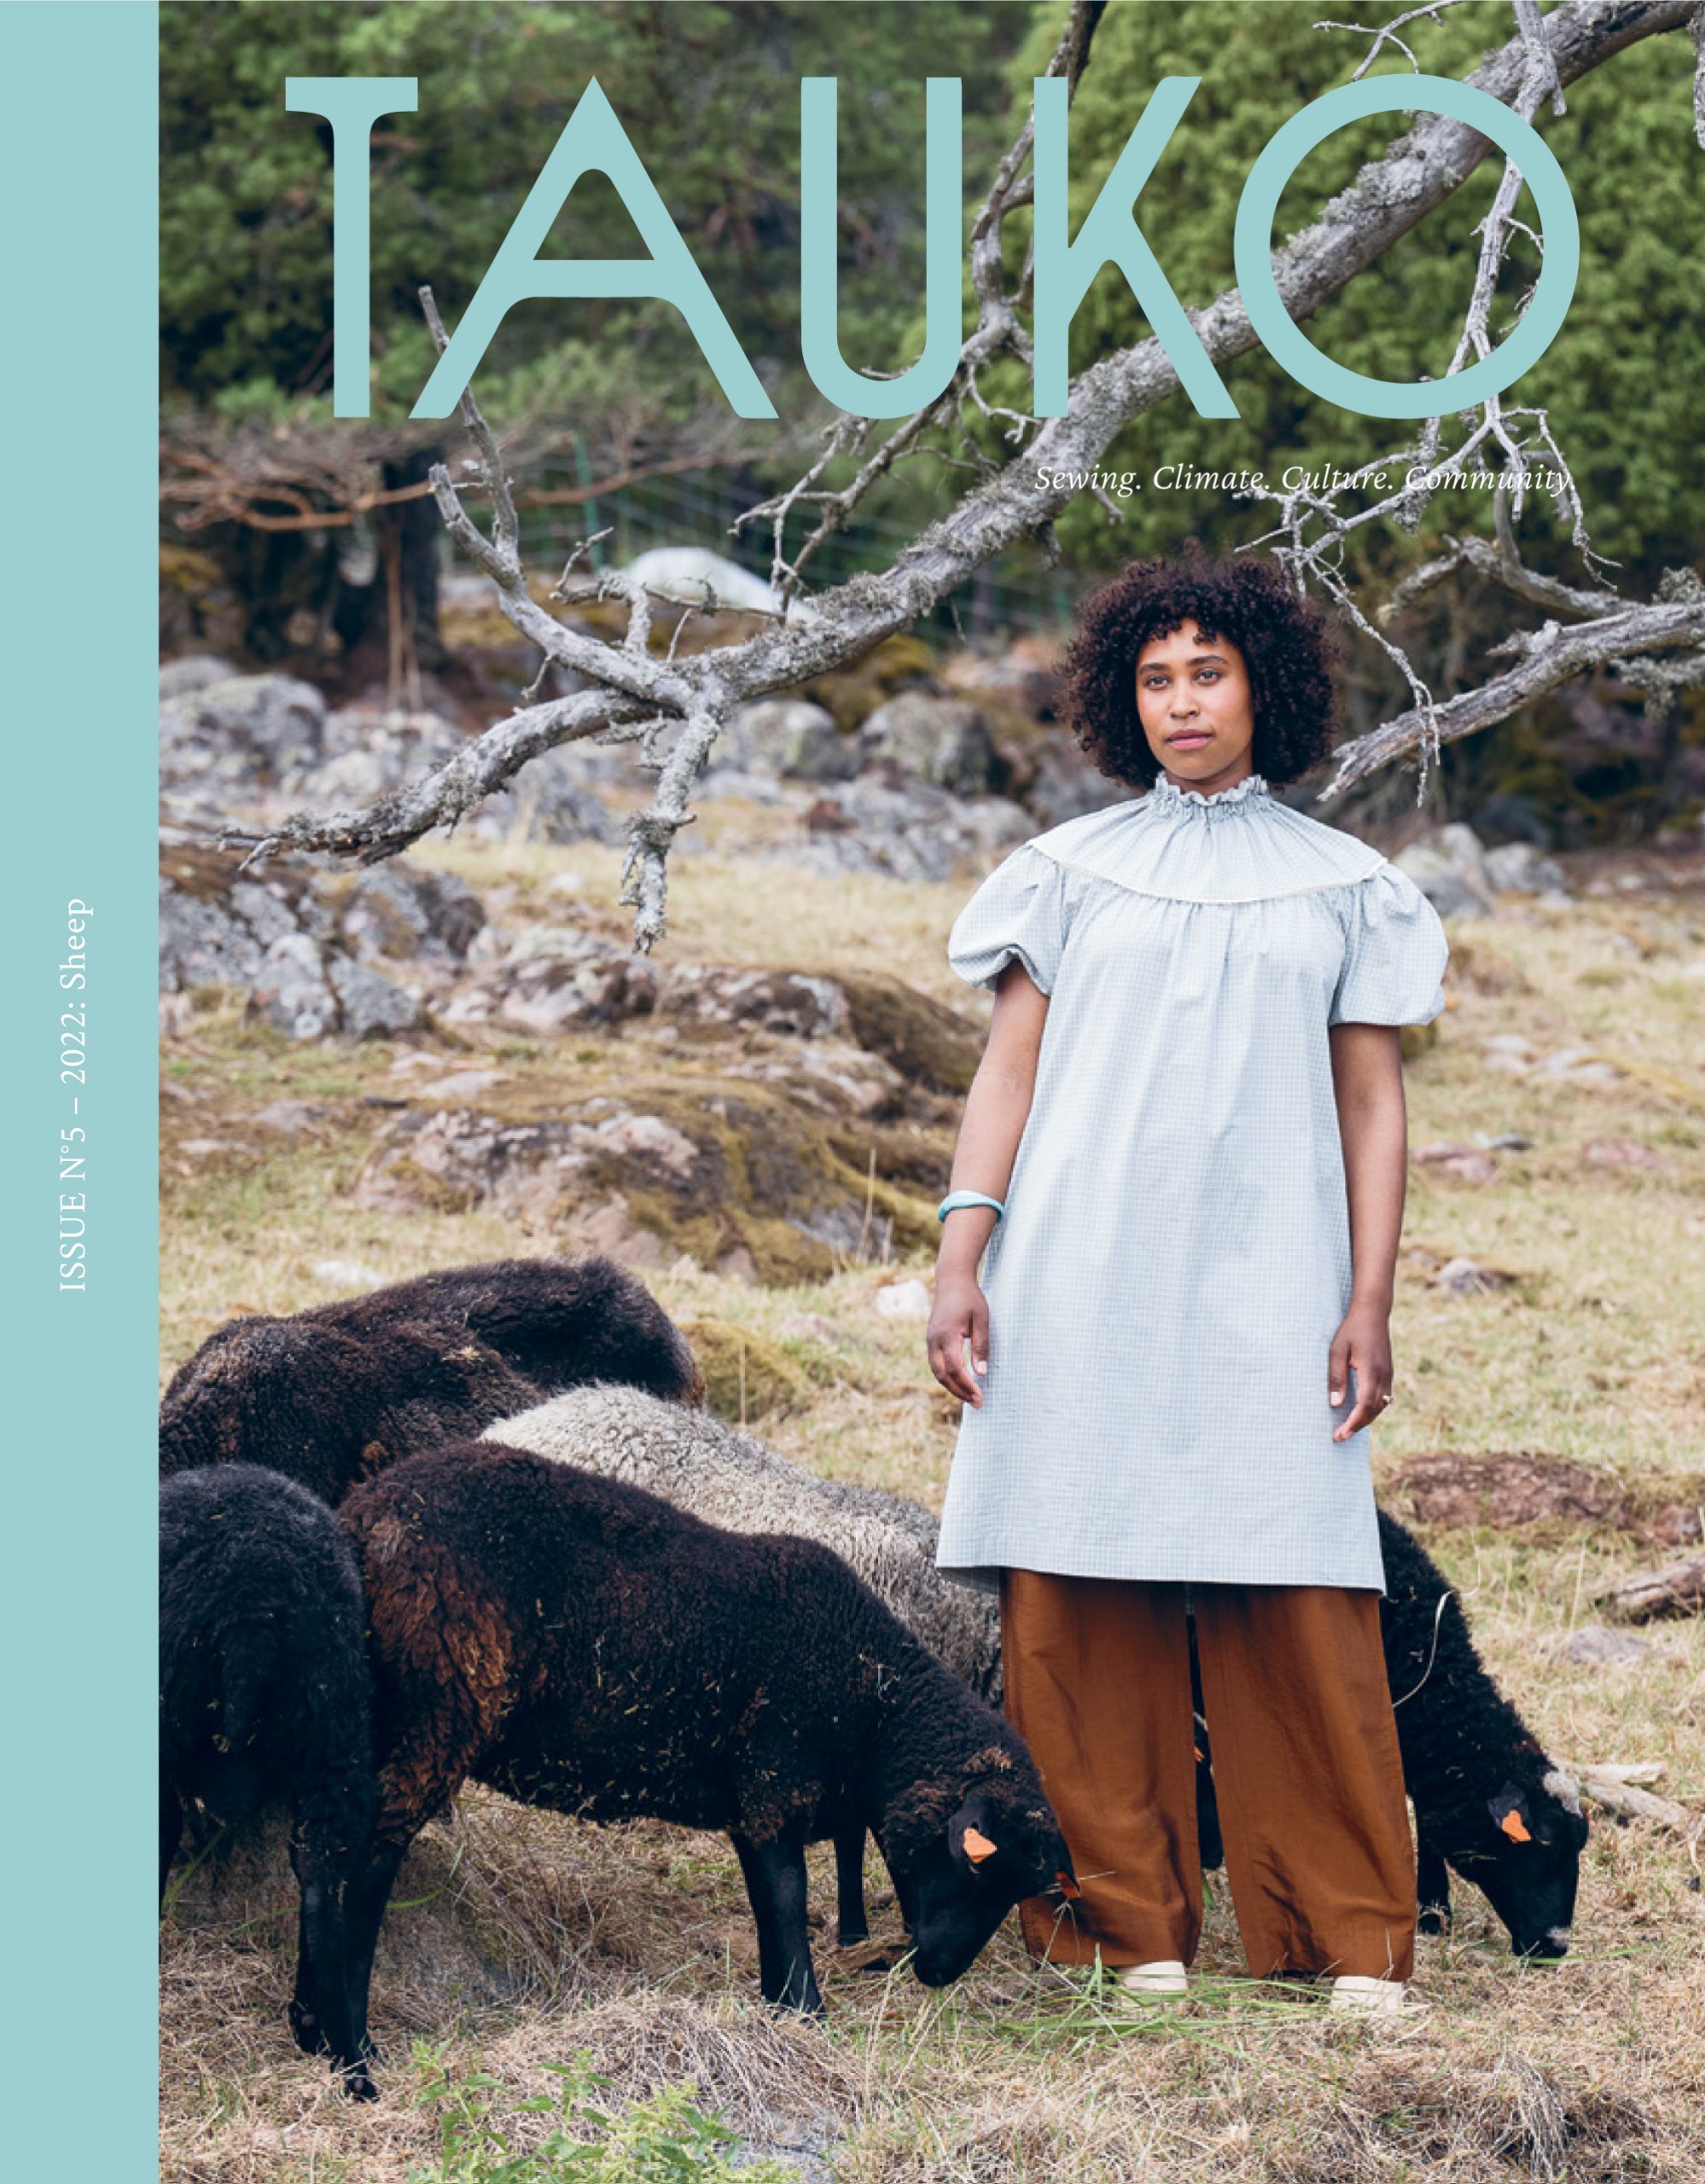 A sewing pattern magazine from Tauko on The Fold Line. A magazine with 10 sewing patterns to make garments such as trousers, tops, sweaters, dresses, coat and bag, fitting all sizes and body shapes.